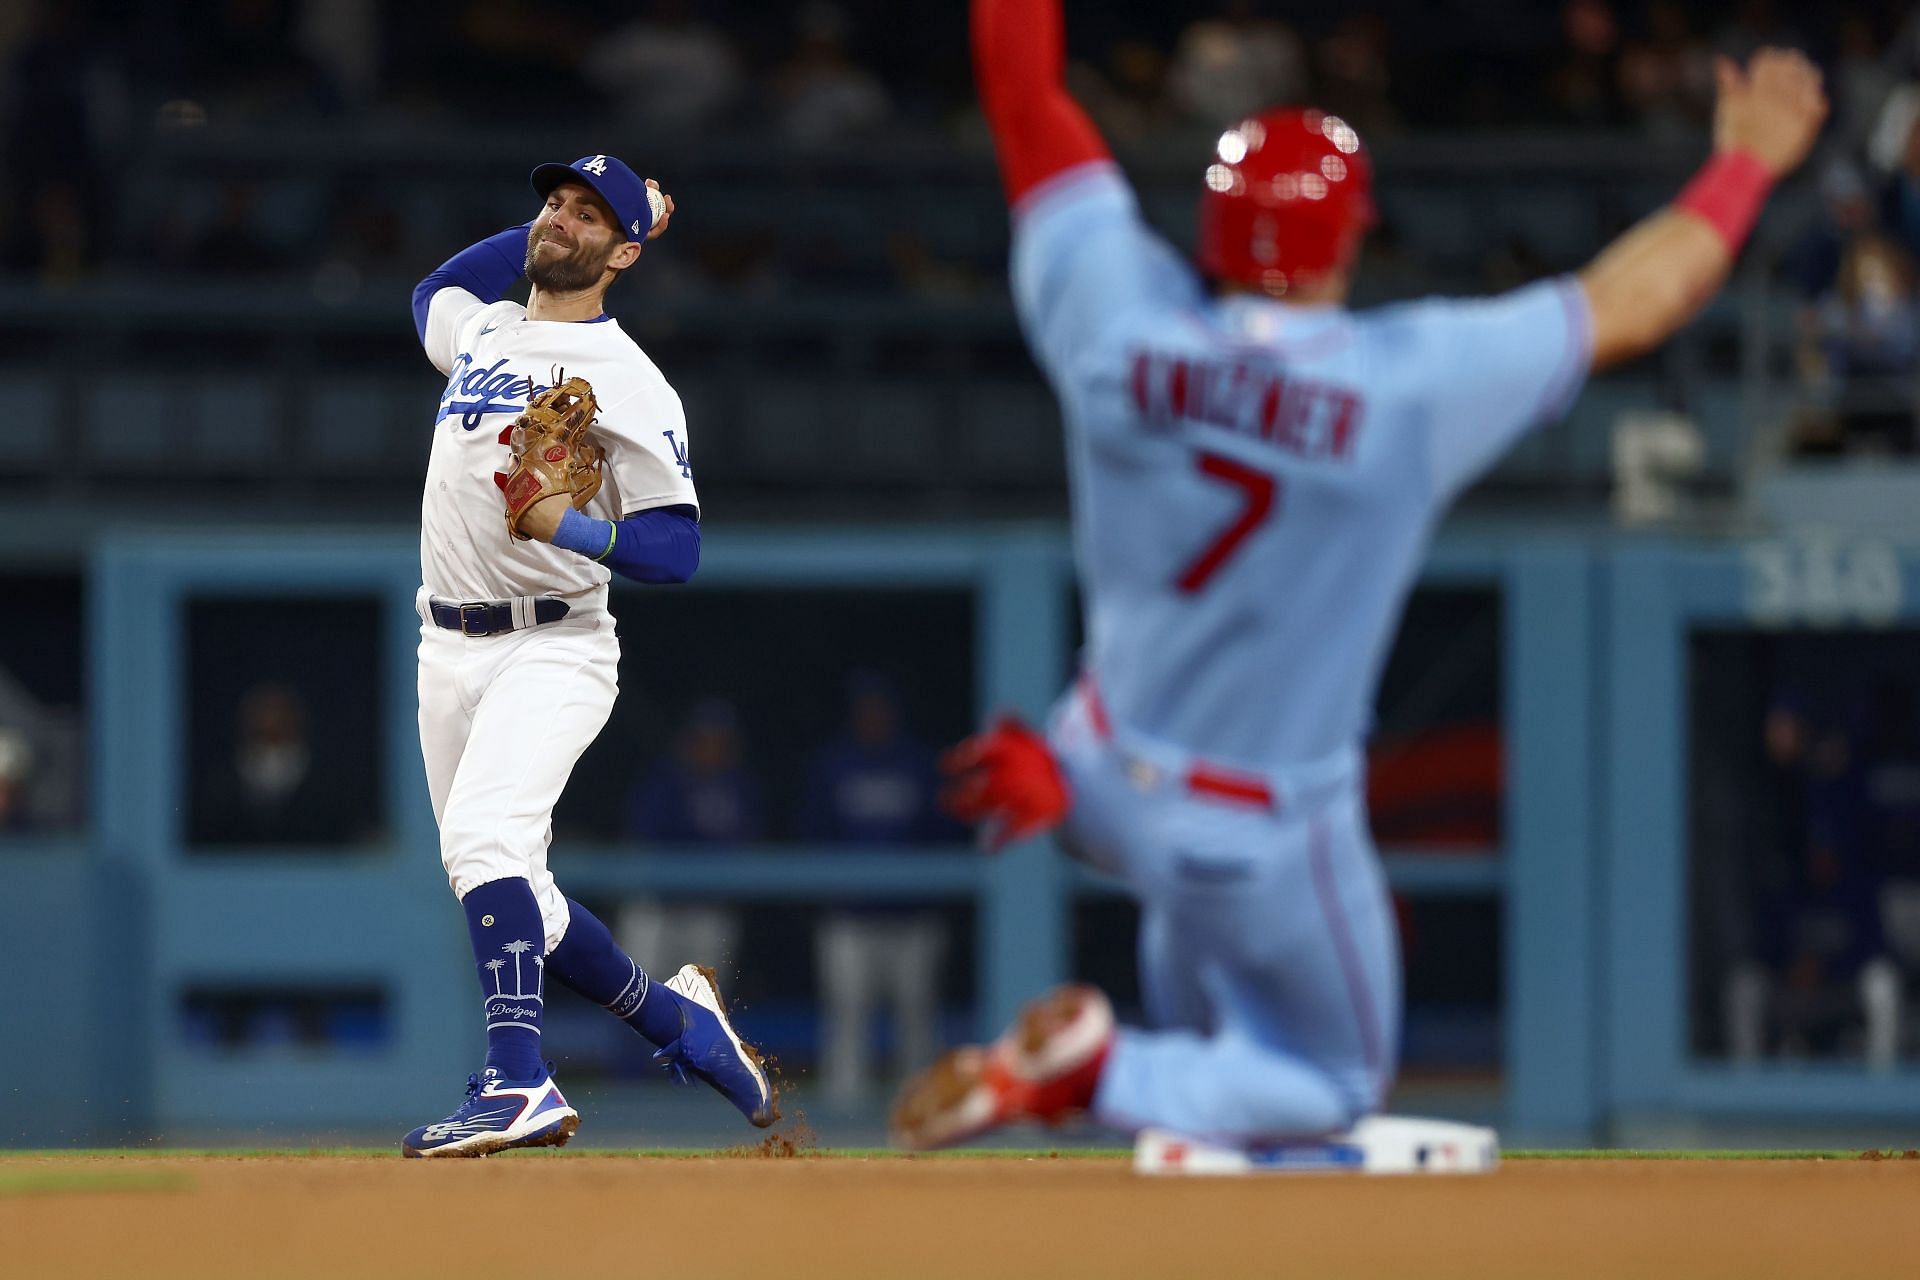 Los Angeles Dodgers on X: Playing catch with Dad on your birthday